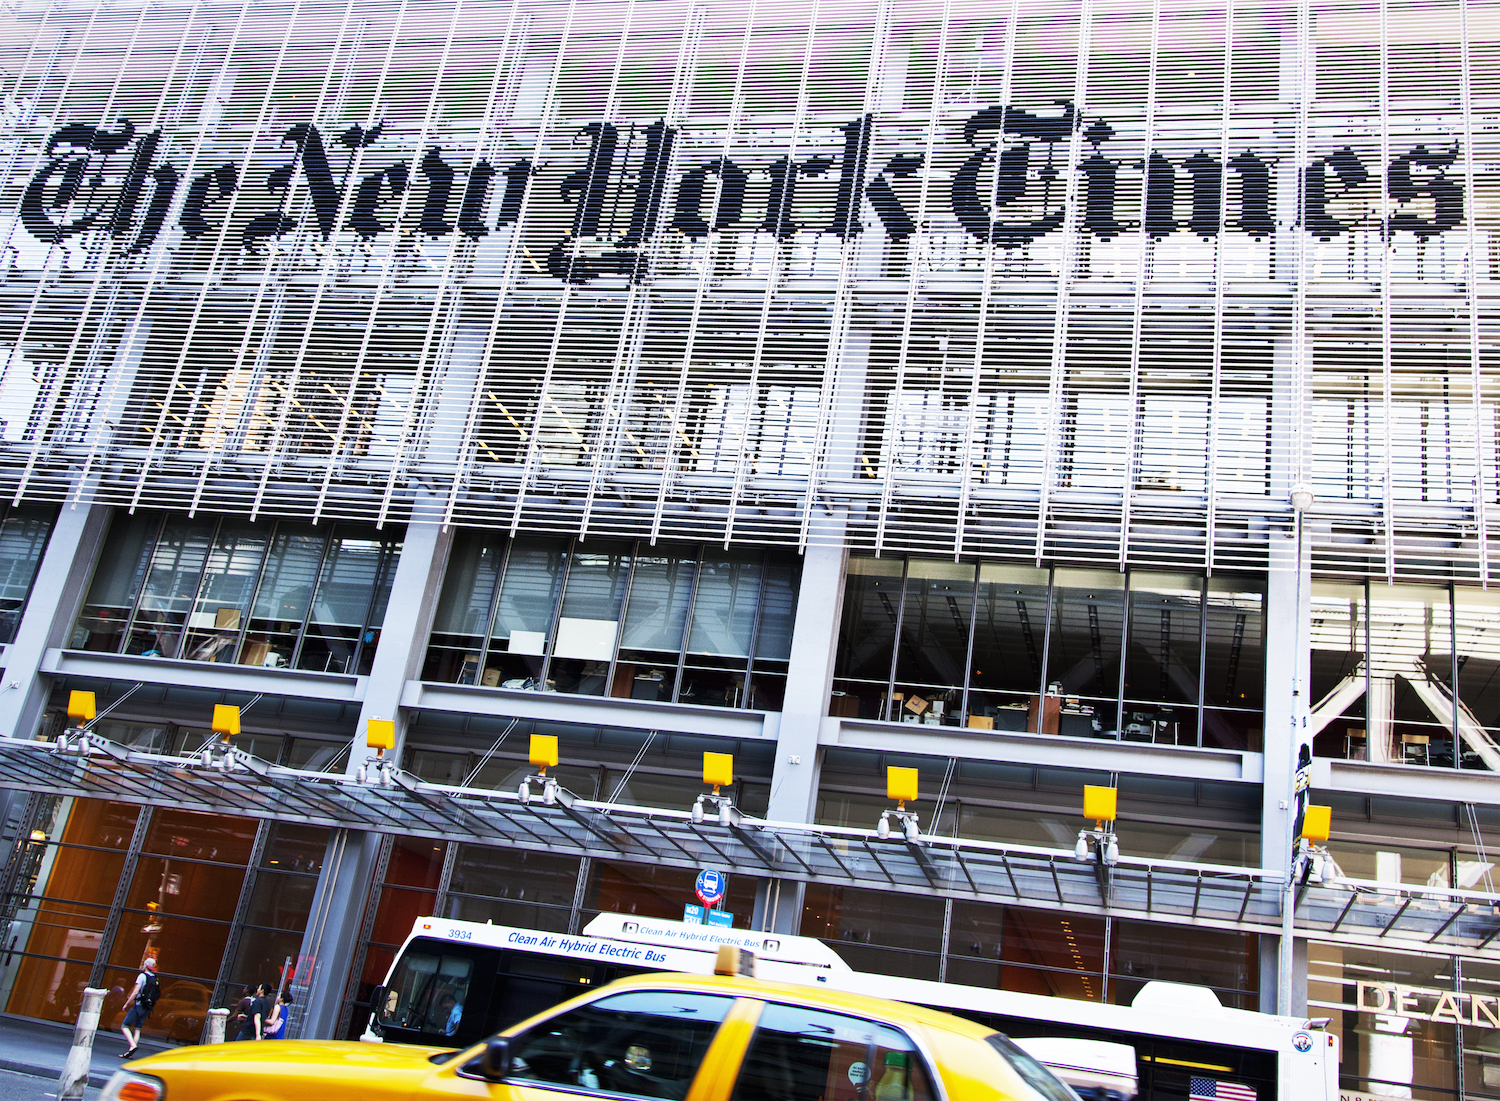 The New York Times Is Planning To Experiment With Blockchain Publishing